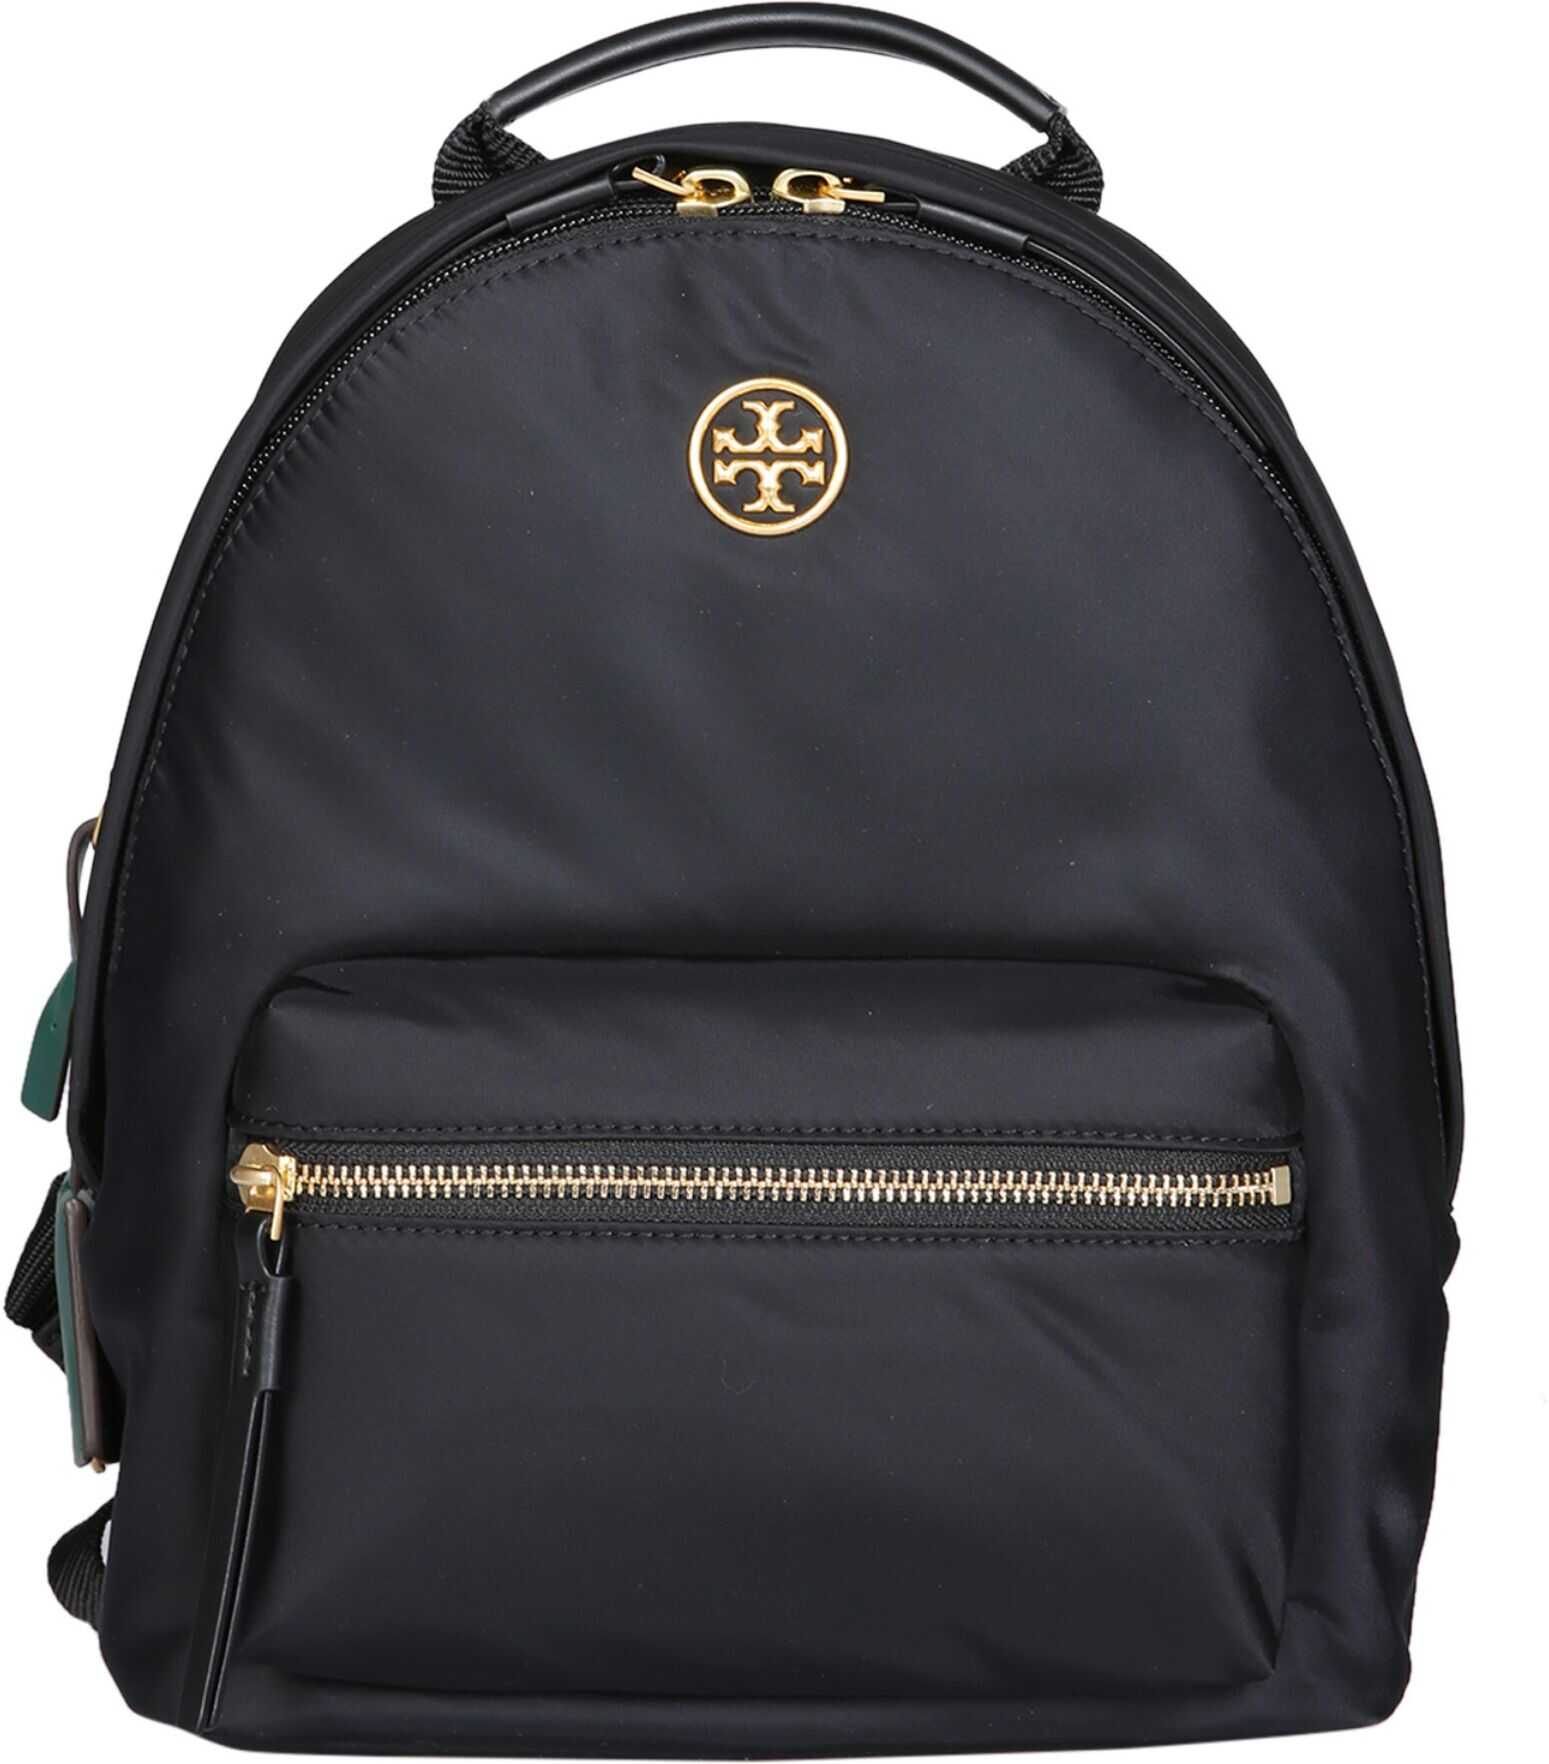 Tory Burch Small Piper Backpack 78821_001 BLACK